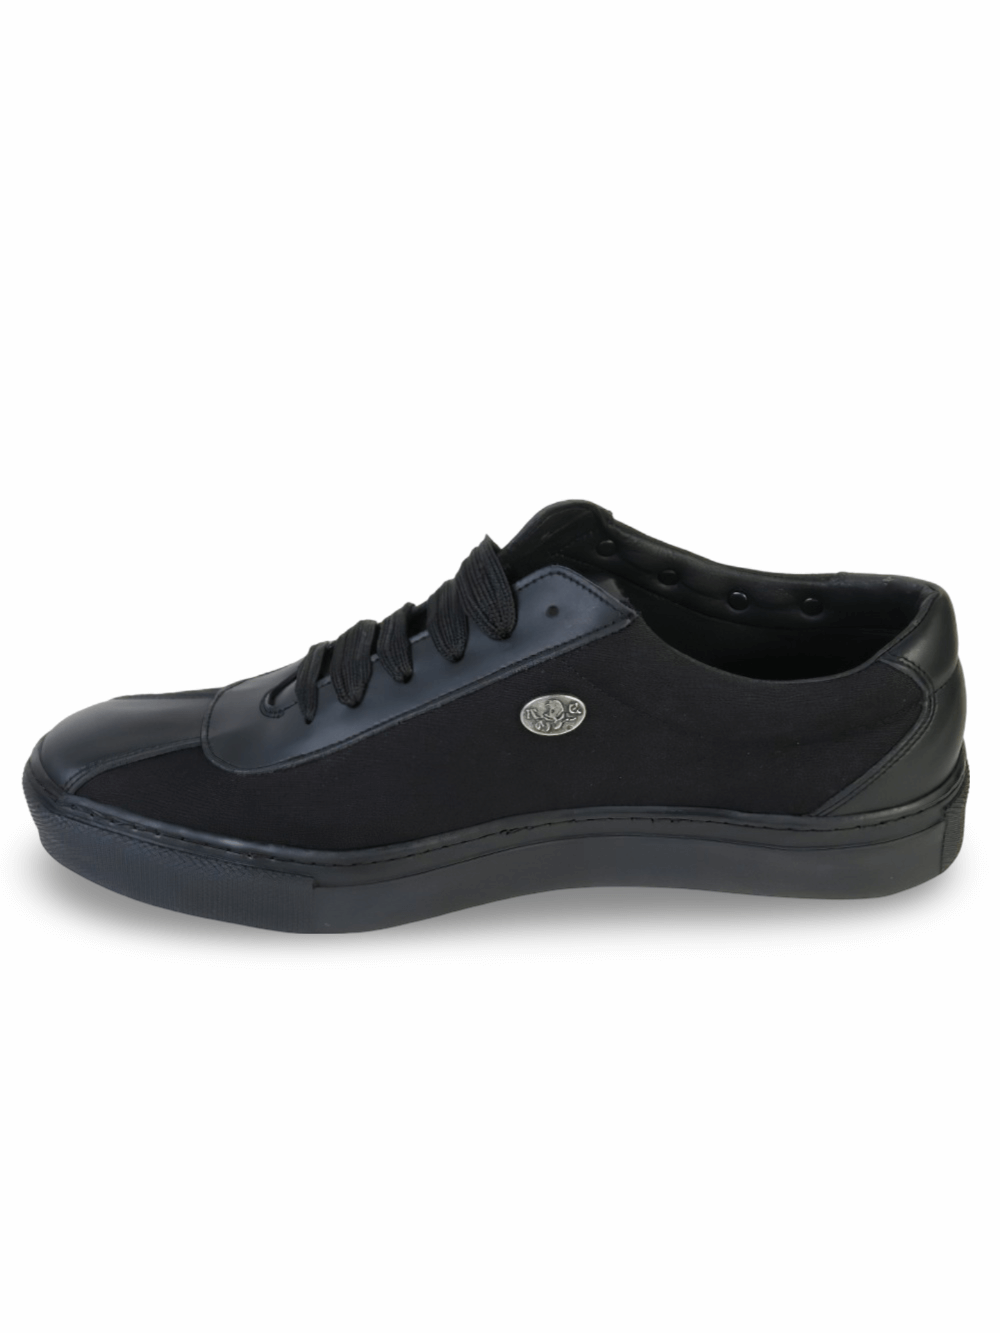 Black Lace-Up Sneakers in Vegan Leather and Canvas